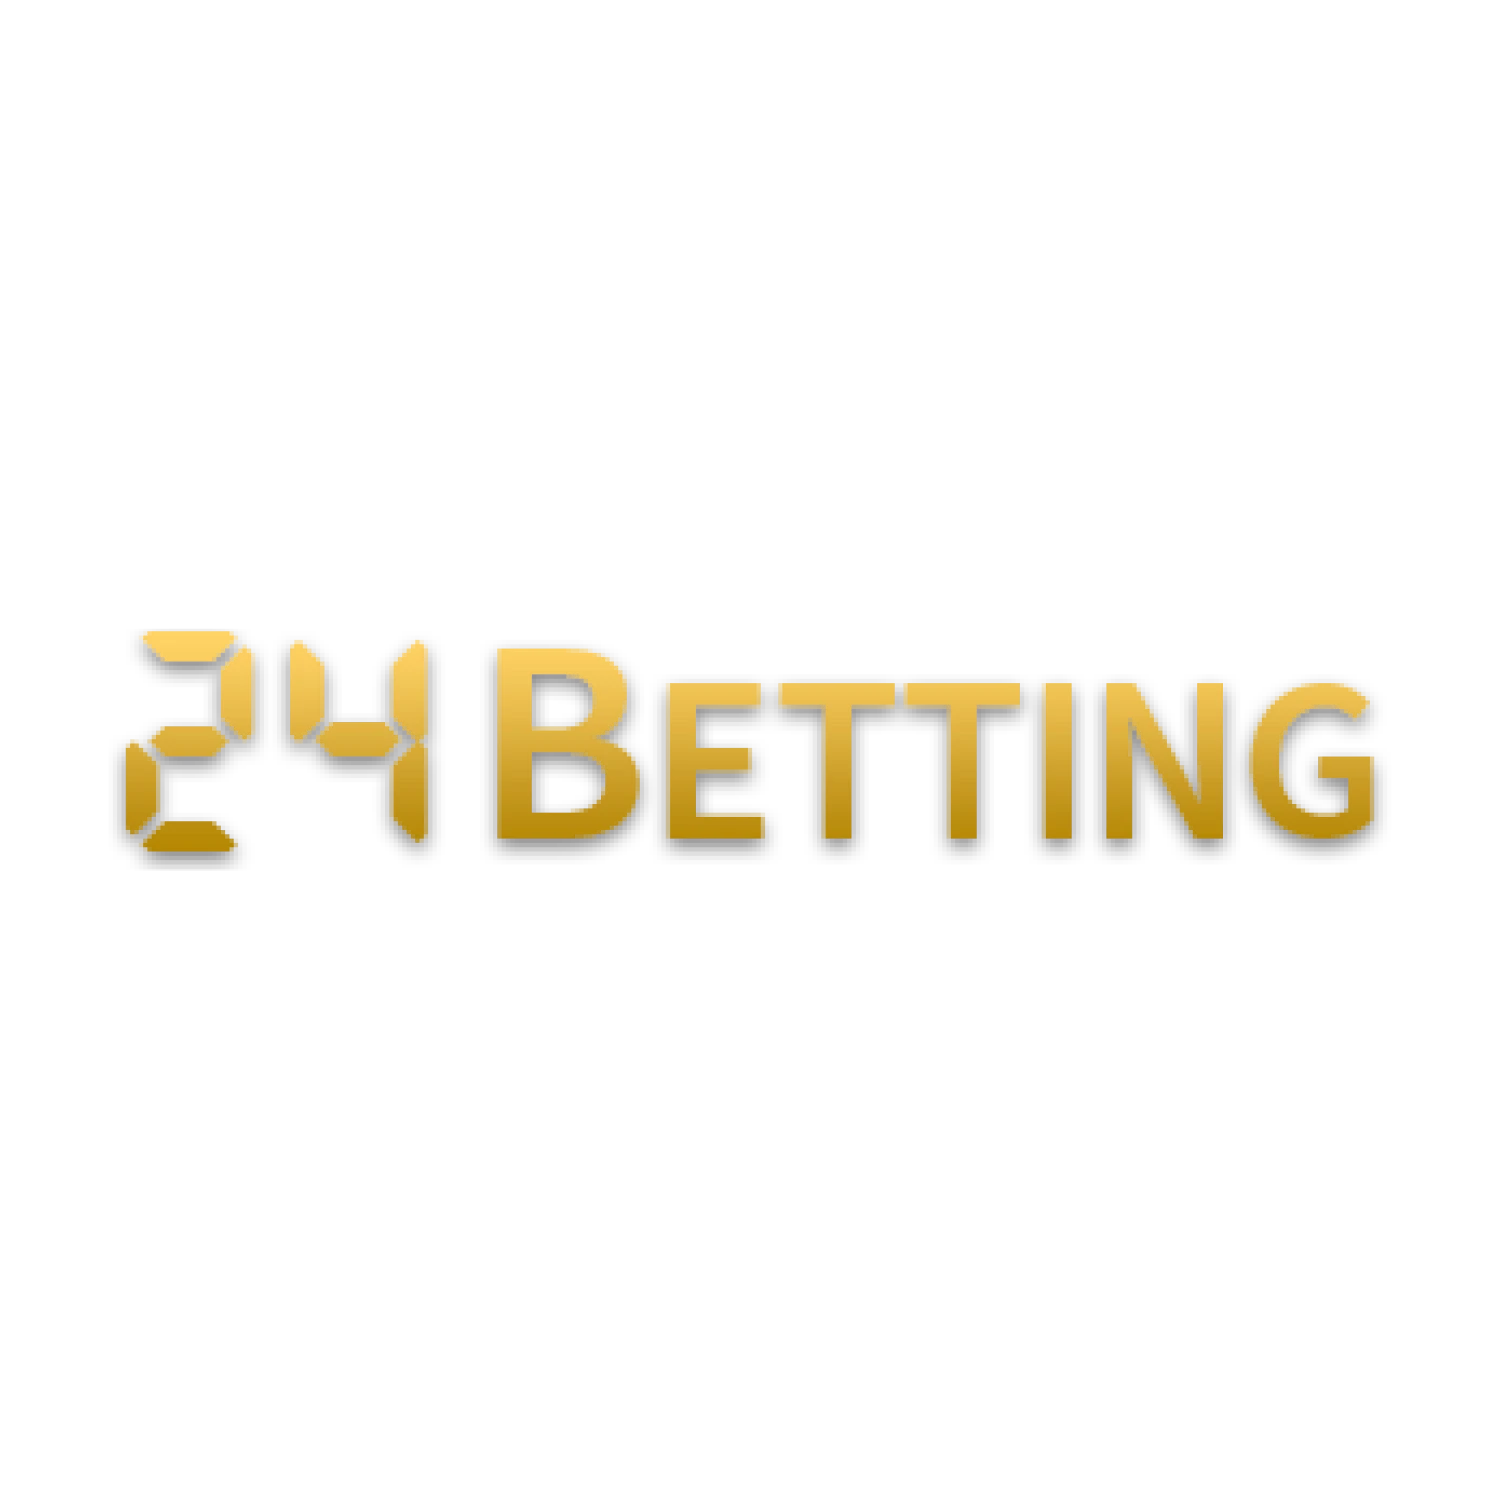 Learn how to place bets on cricket betting at the 24betting site.